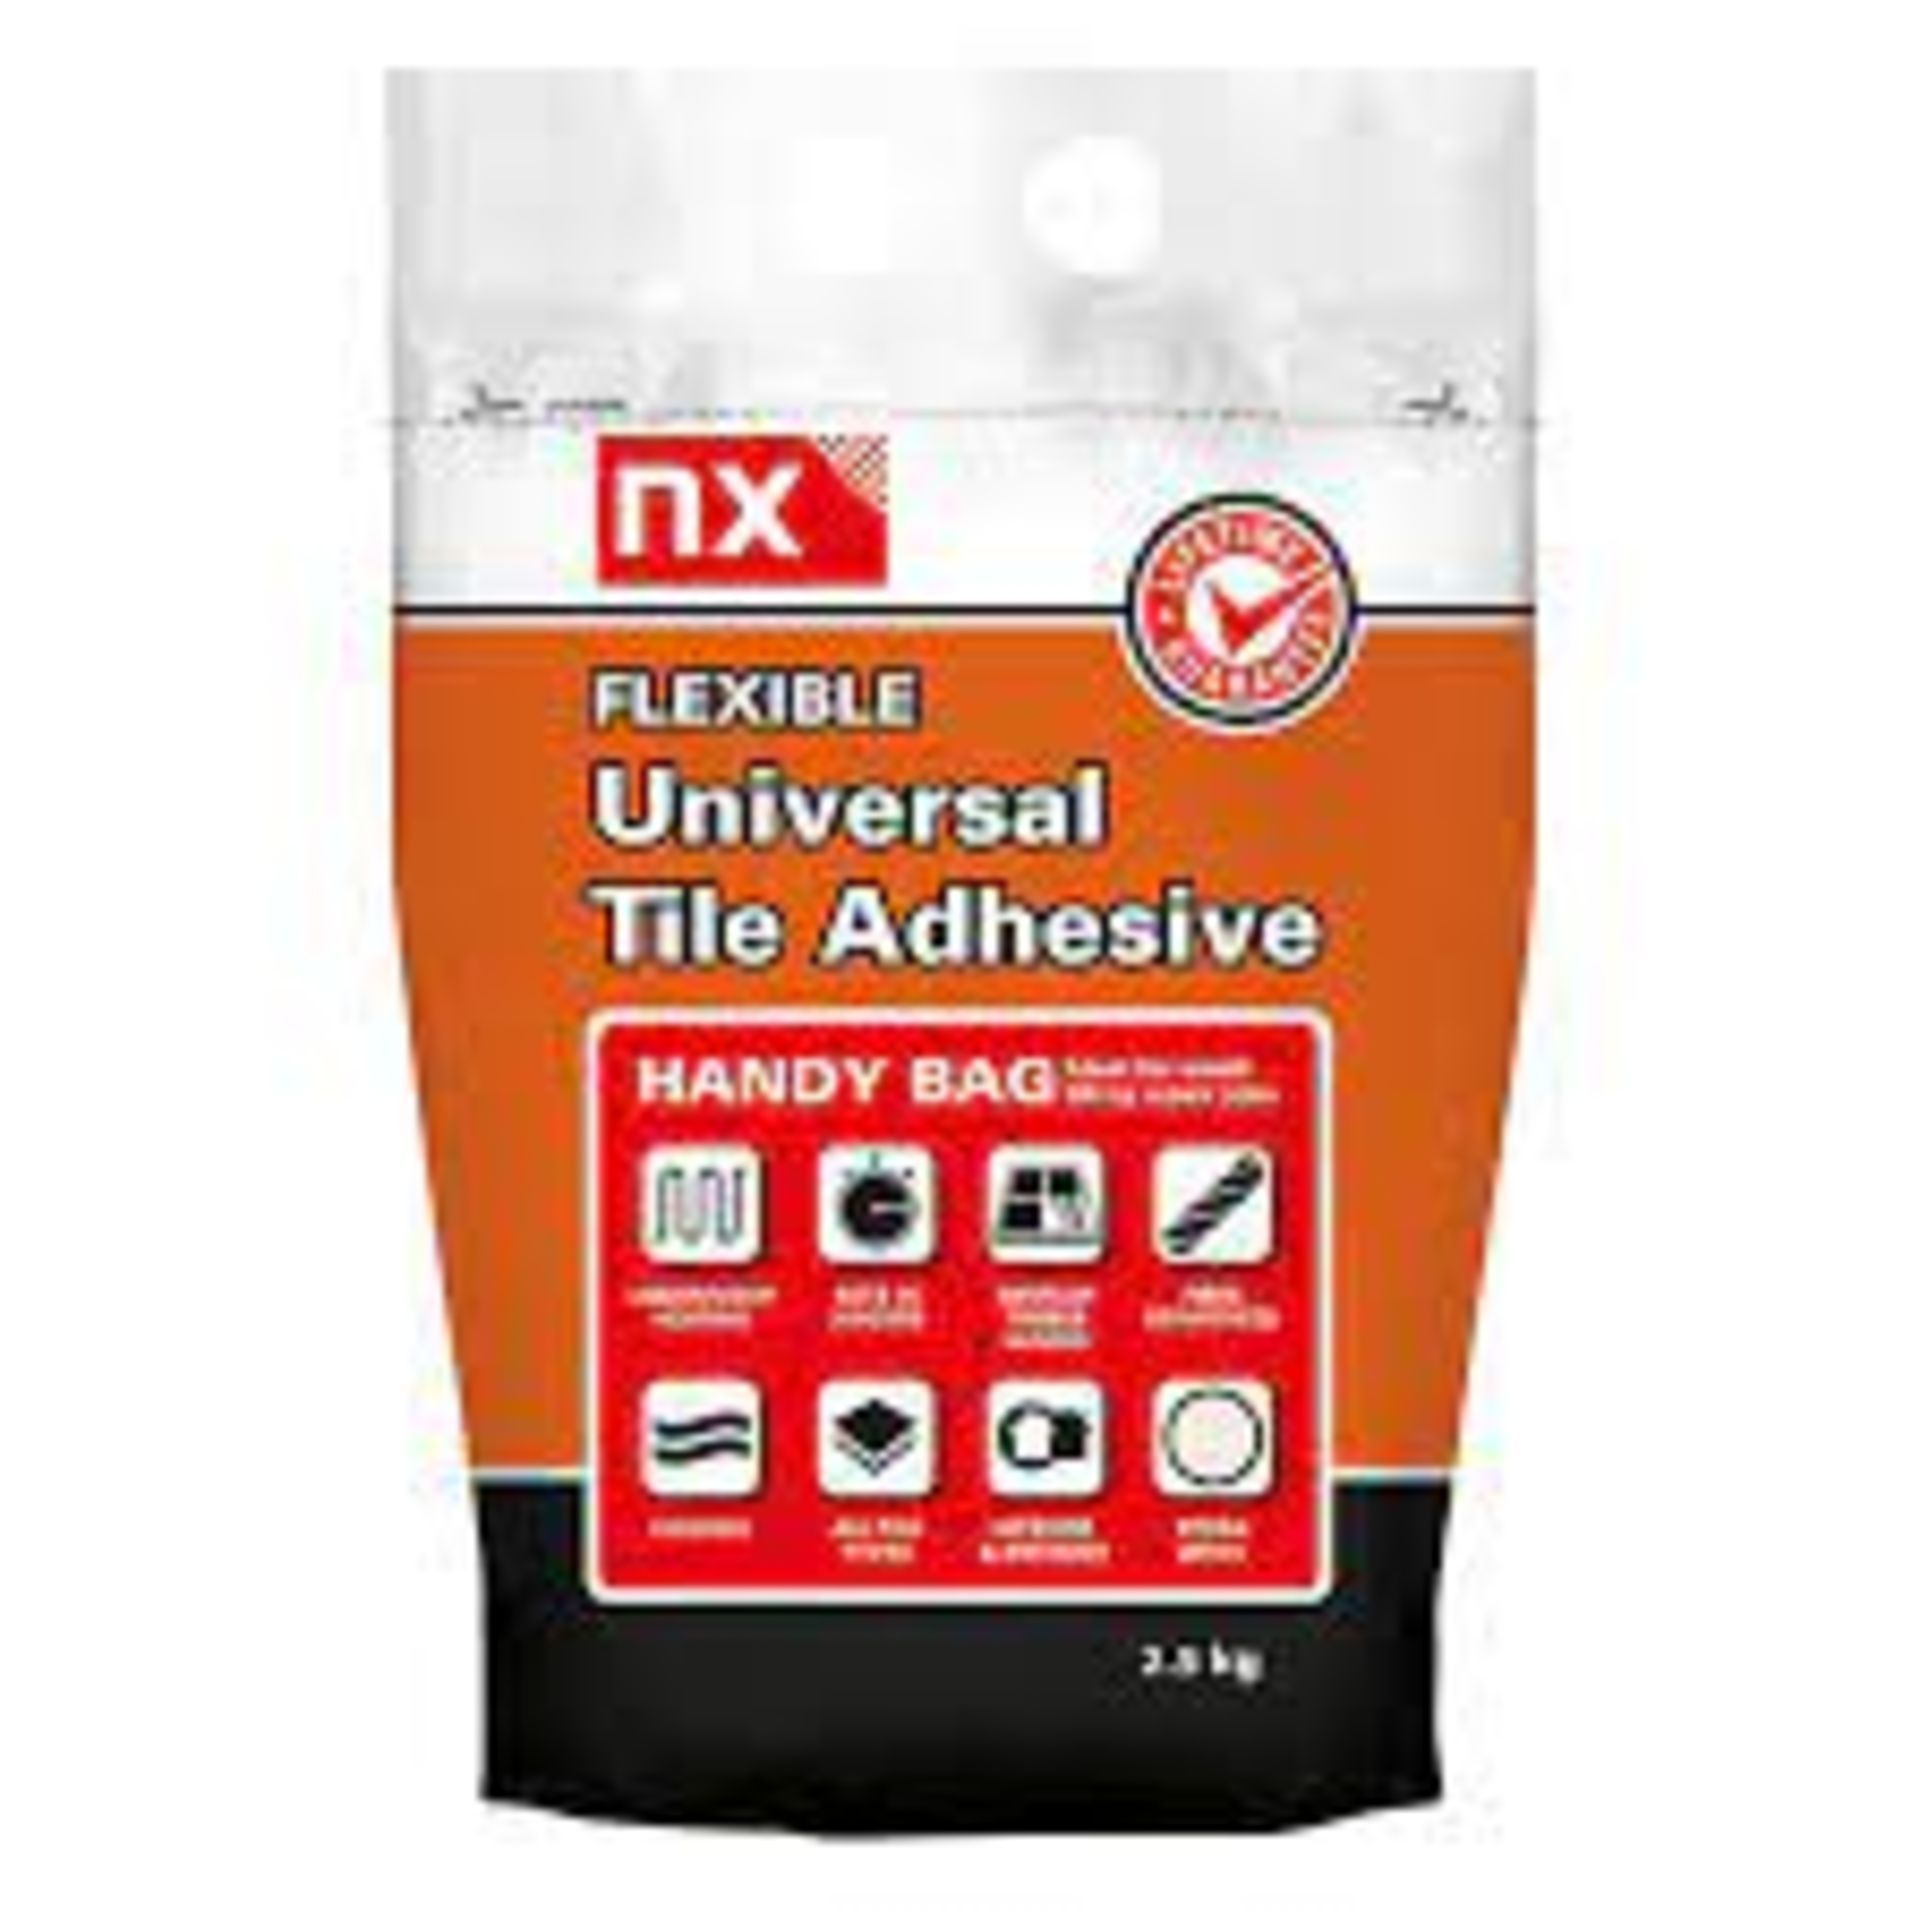 60 X 2.5KG BAGS OF NX FLEXIBLE UNIVERSAL TILE ADHESIVE. STONE WHITE. SUITABLE FOR UNDERFLOOR